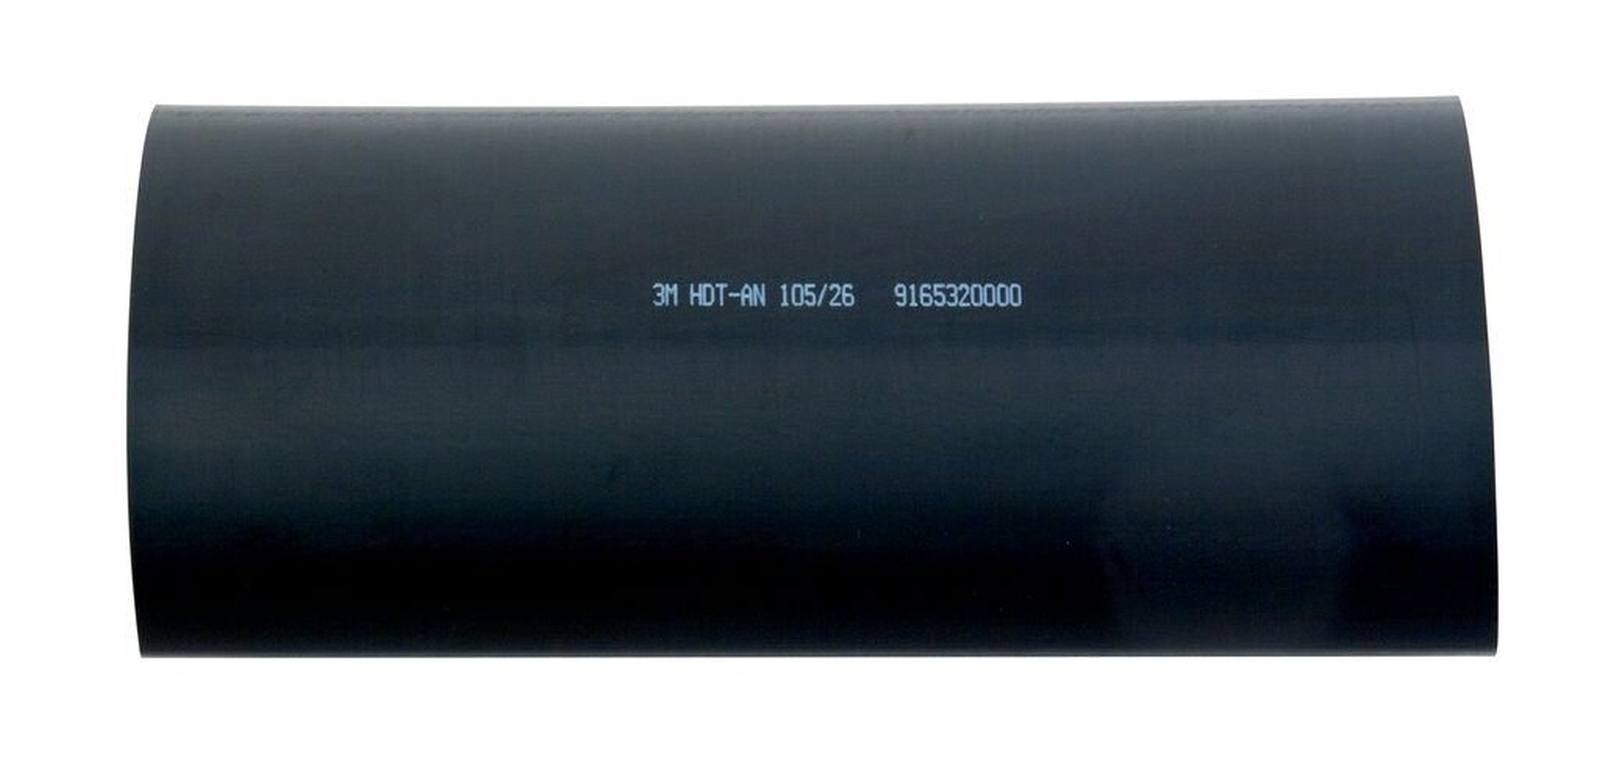 3M HDT-AN Thick-walled heat-shrink tubing with adhesive, black, 105/26 mm, 1 m